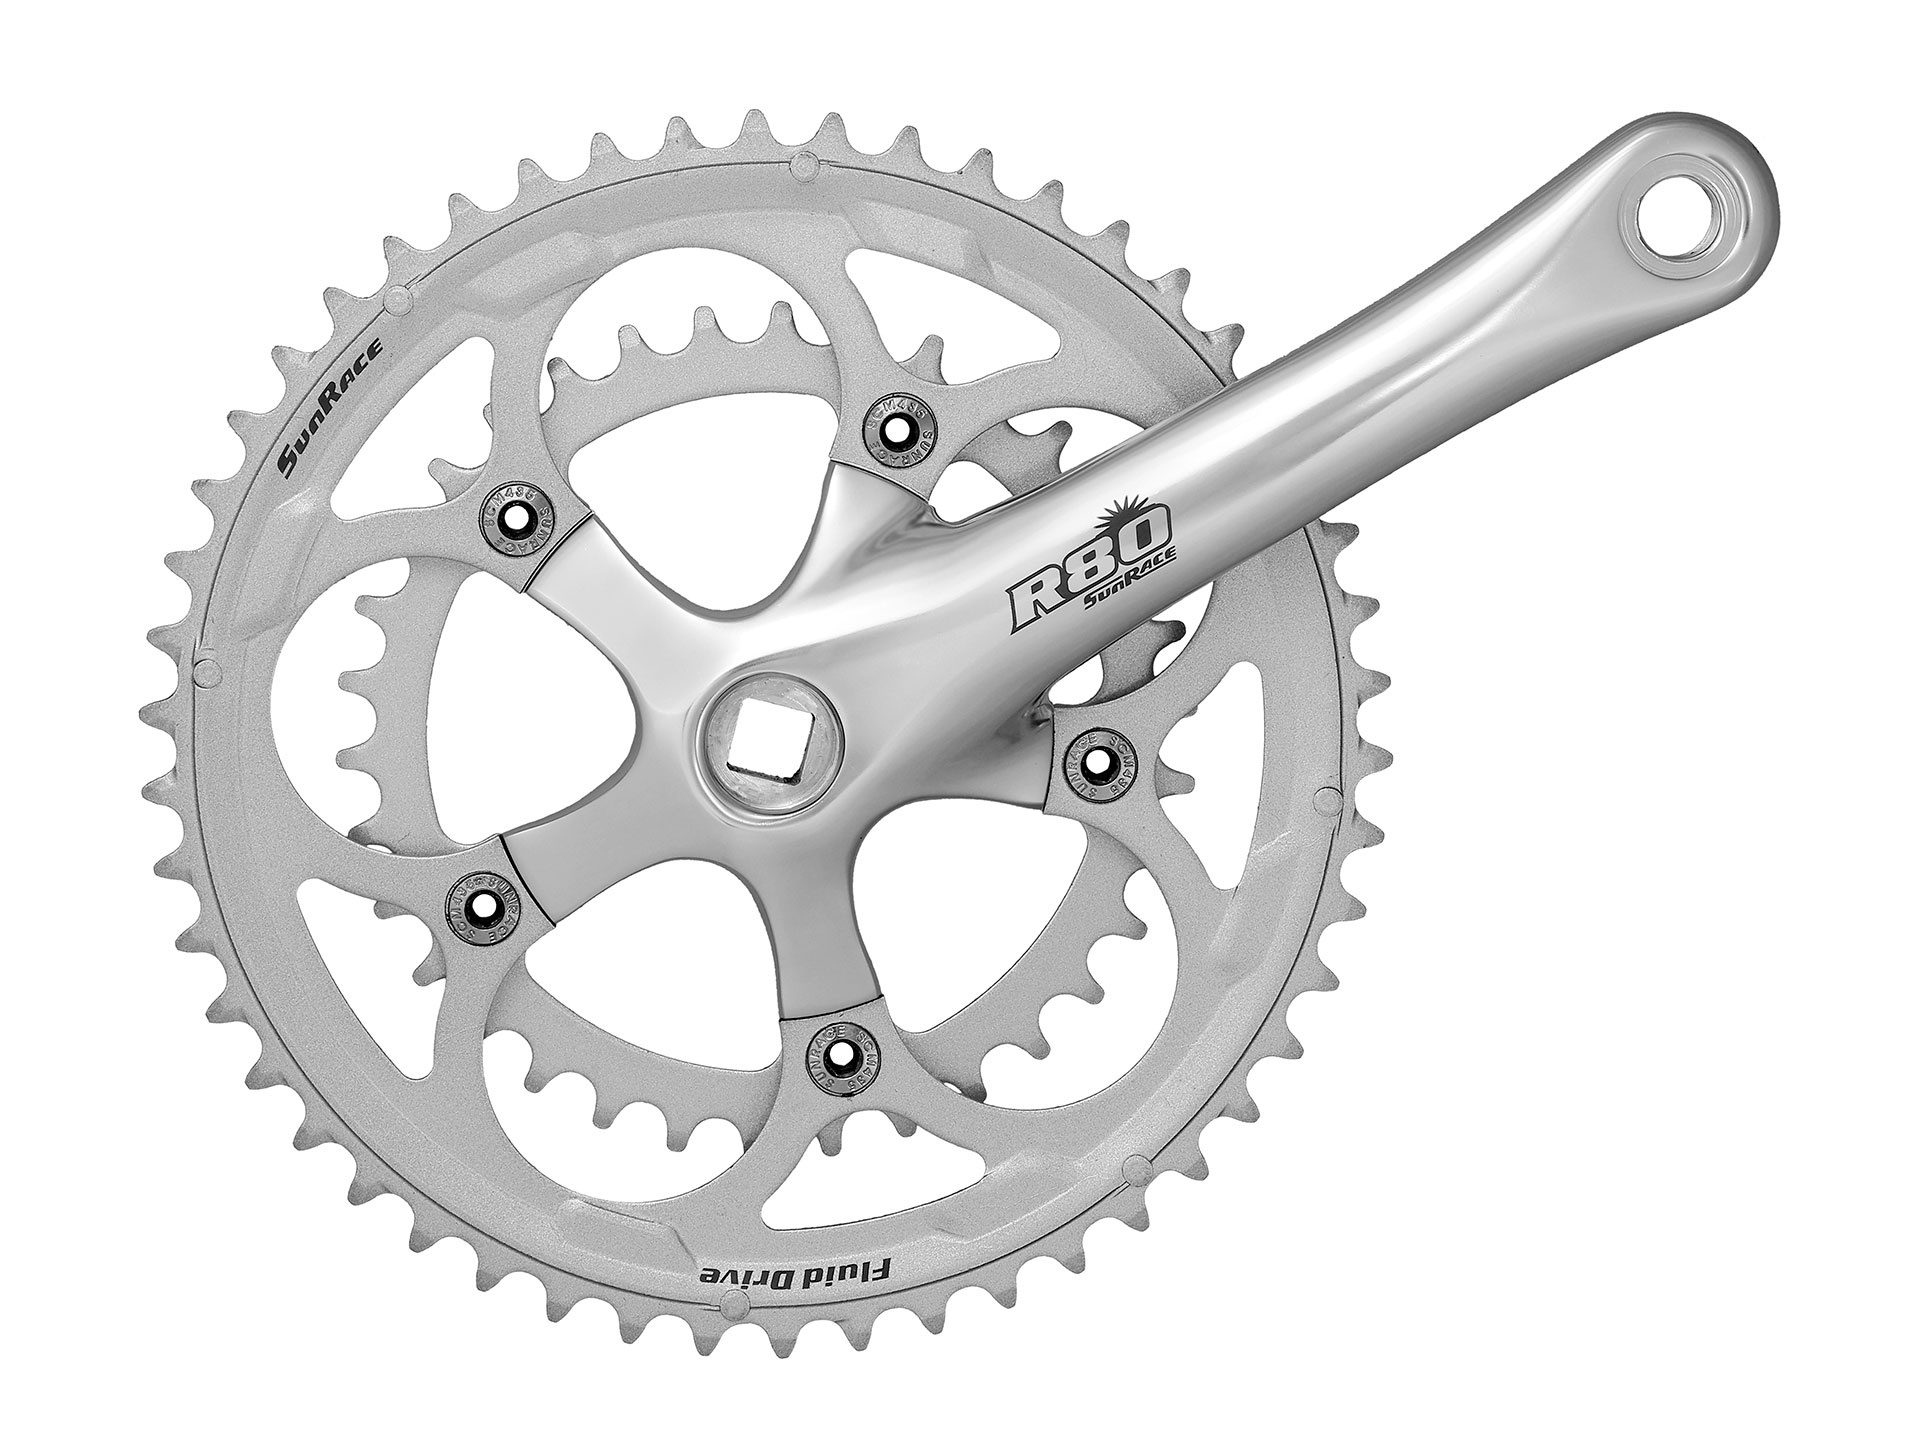 Sunrace FCR96 Chainset: 9 Speed 50/34T 170mm